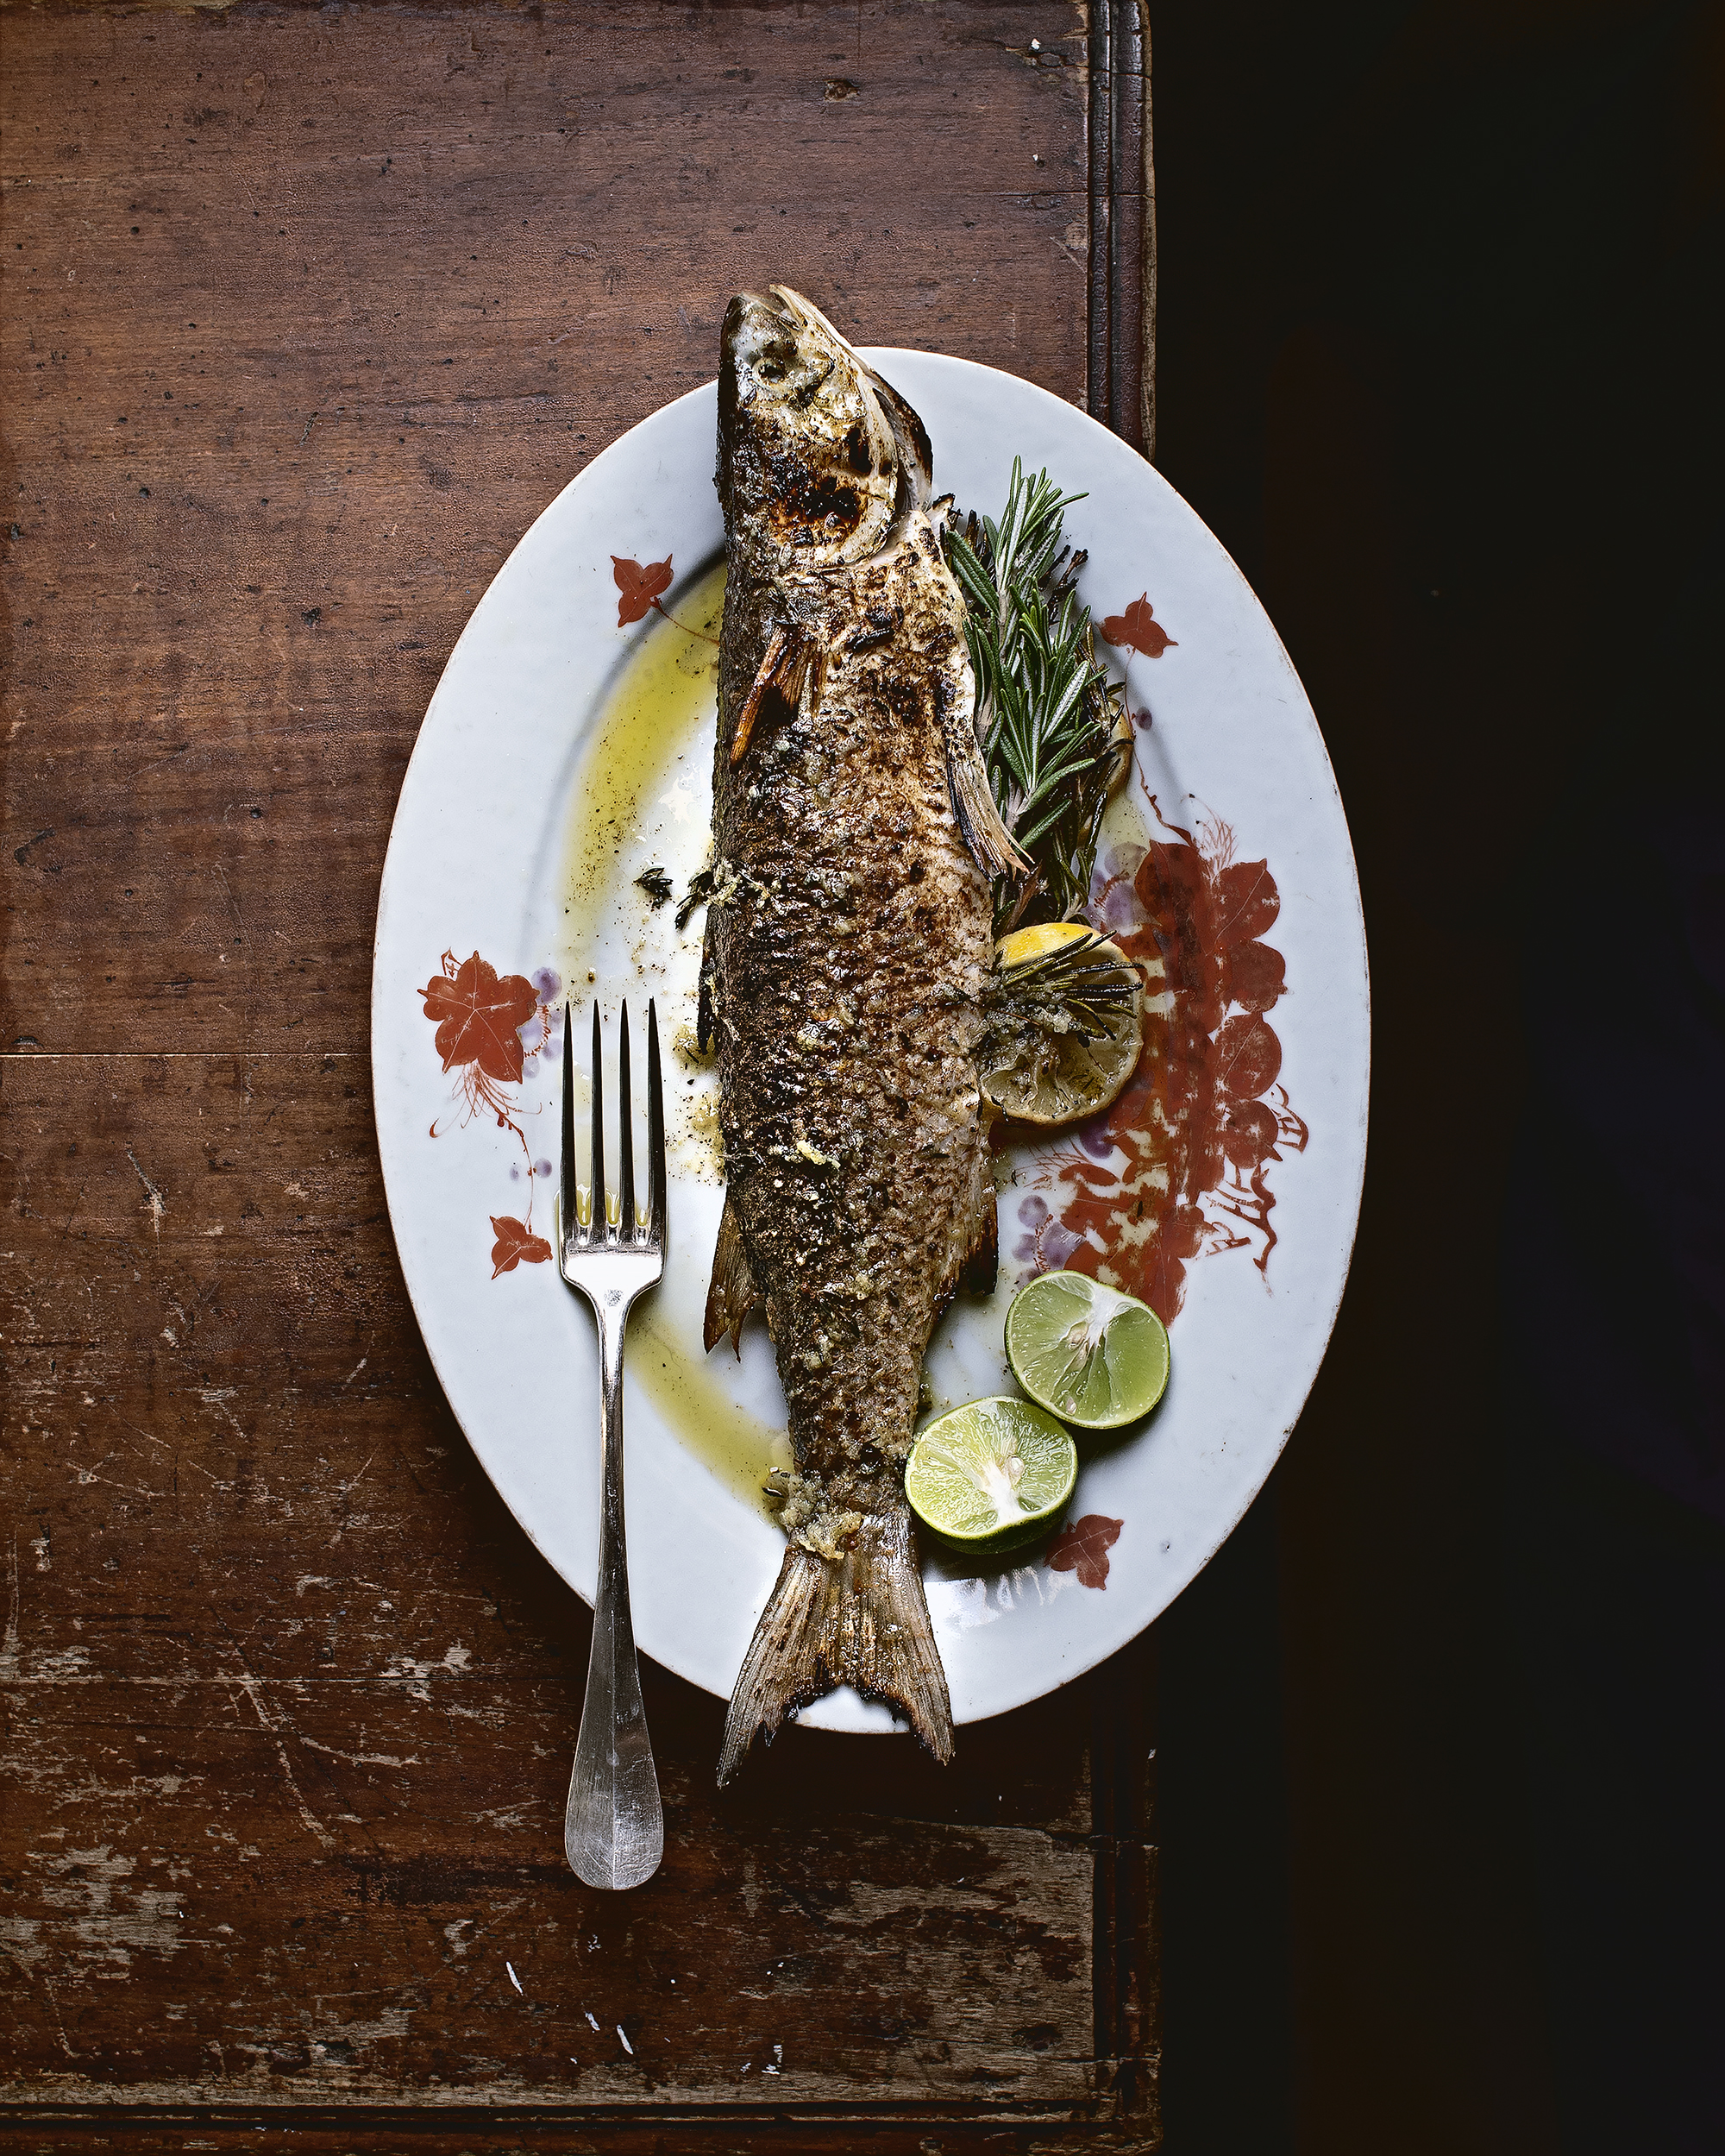 Perfect slow-grilled whole fish